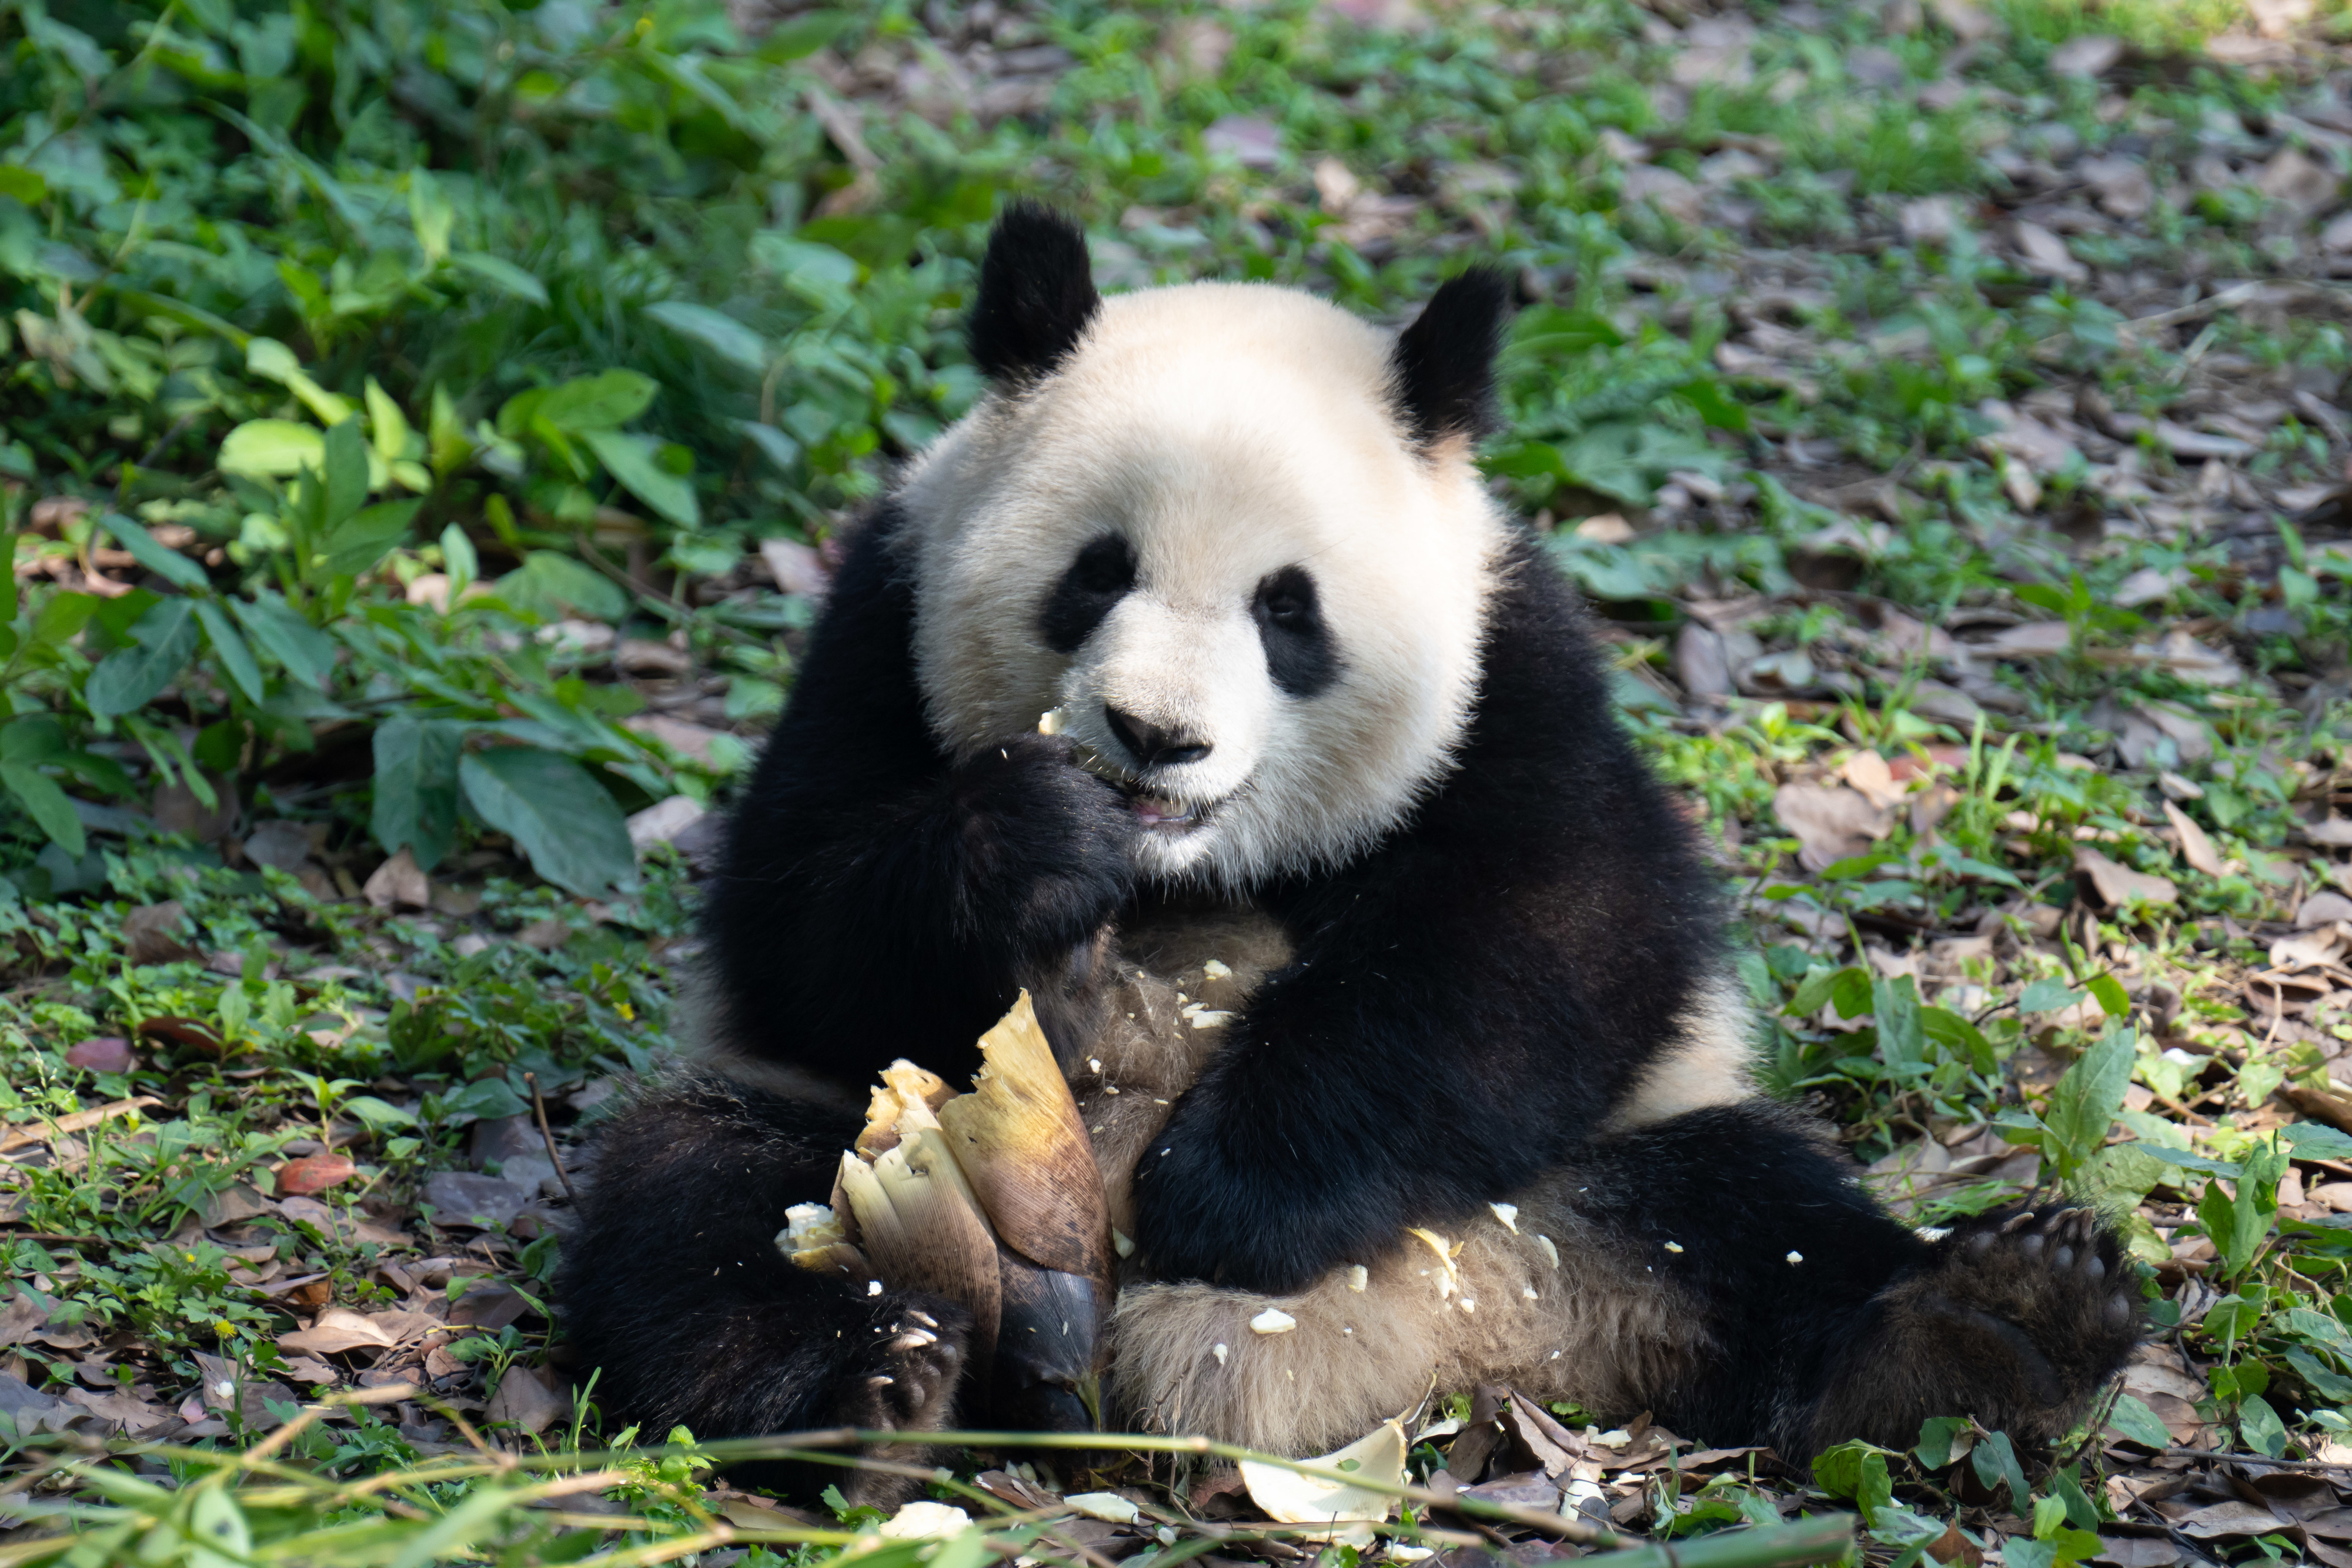 A panda sits on grass, eating bamboo